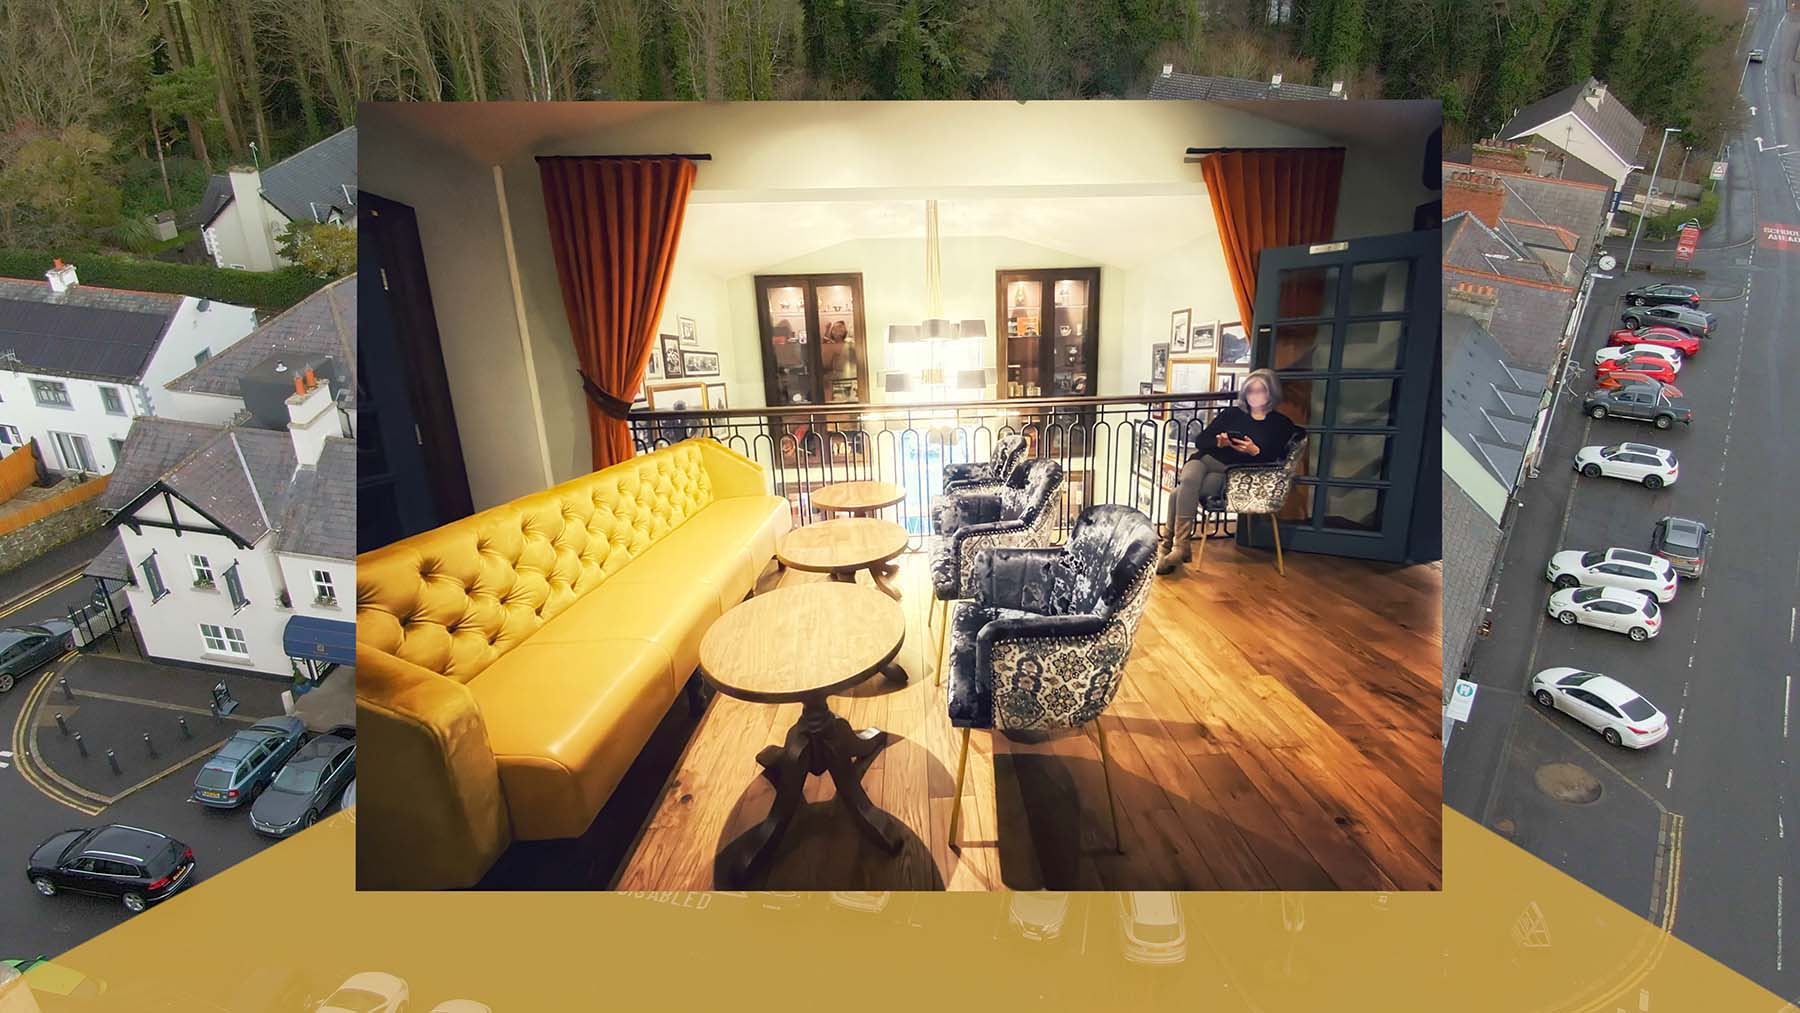 Video screenshot 6 showing photo of seating area in bar at Hillyard House overlaid on aerial footage of Castlewellan village from video by Stephen S T Bradley aerial hotel video production in the UK and Ireland